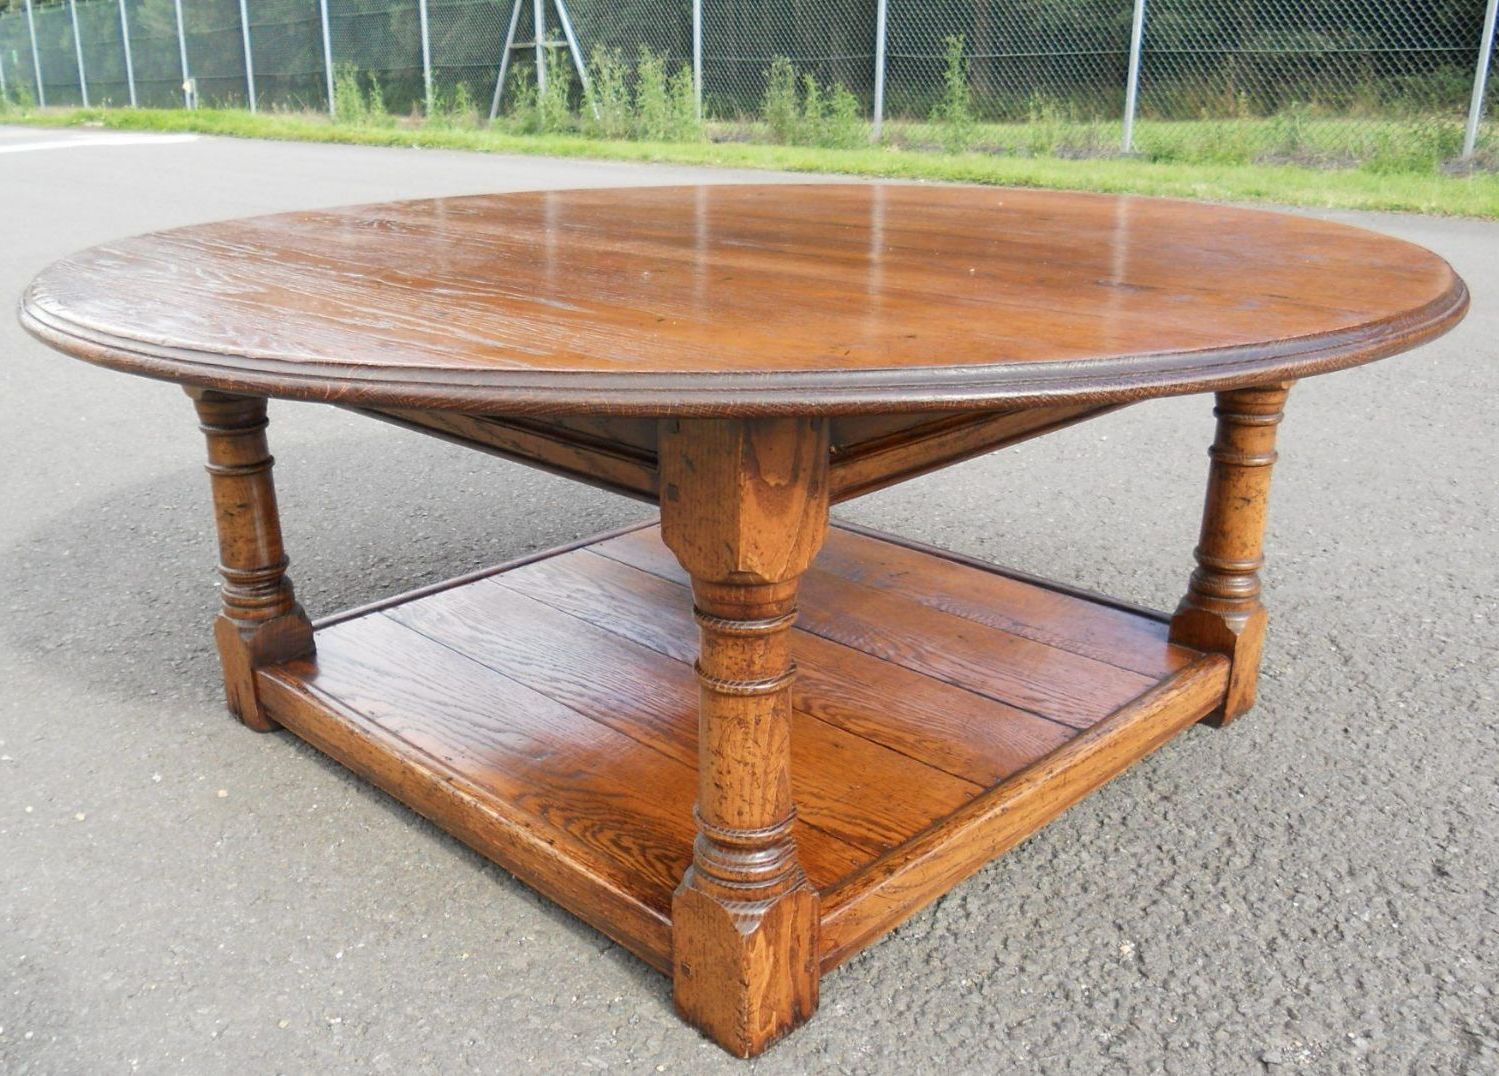 Round Coffee Tables Within Most Current Large Round Oak Coffee Table – Sold (View 8 of 20)